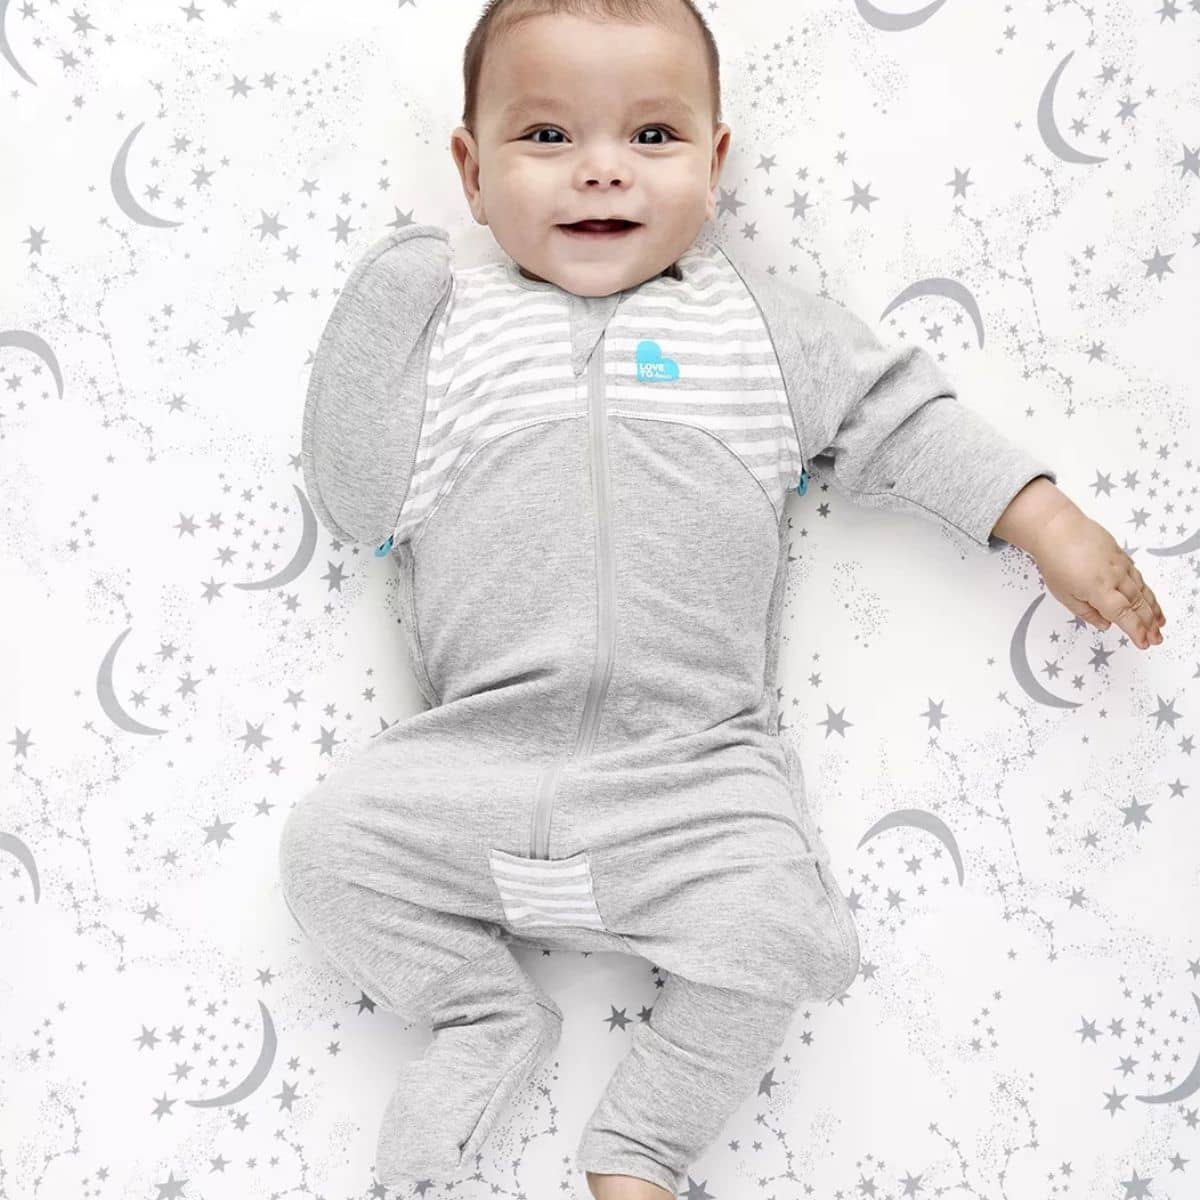 Love to Dream Swaddle UP Transition Suit (50/50) Original 1.0 TOG - Grey